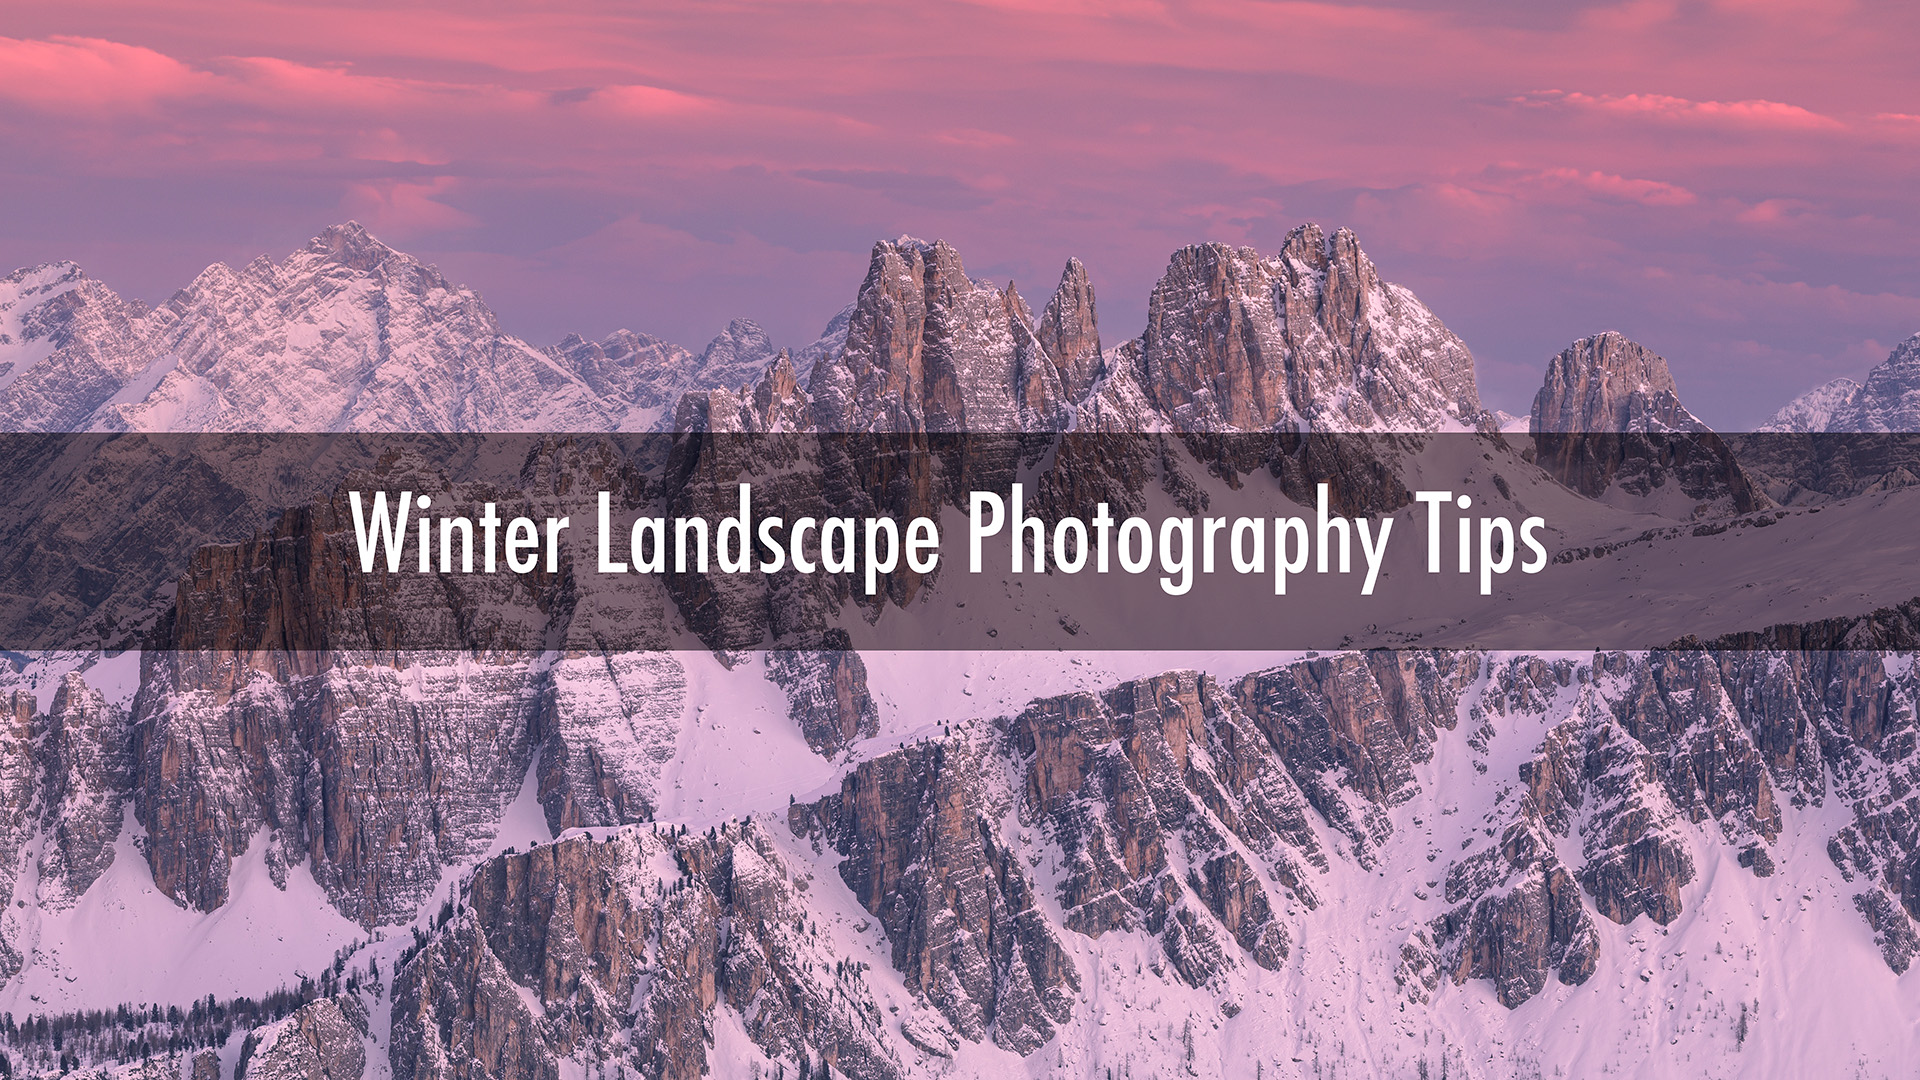 Winter landscape photography tips